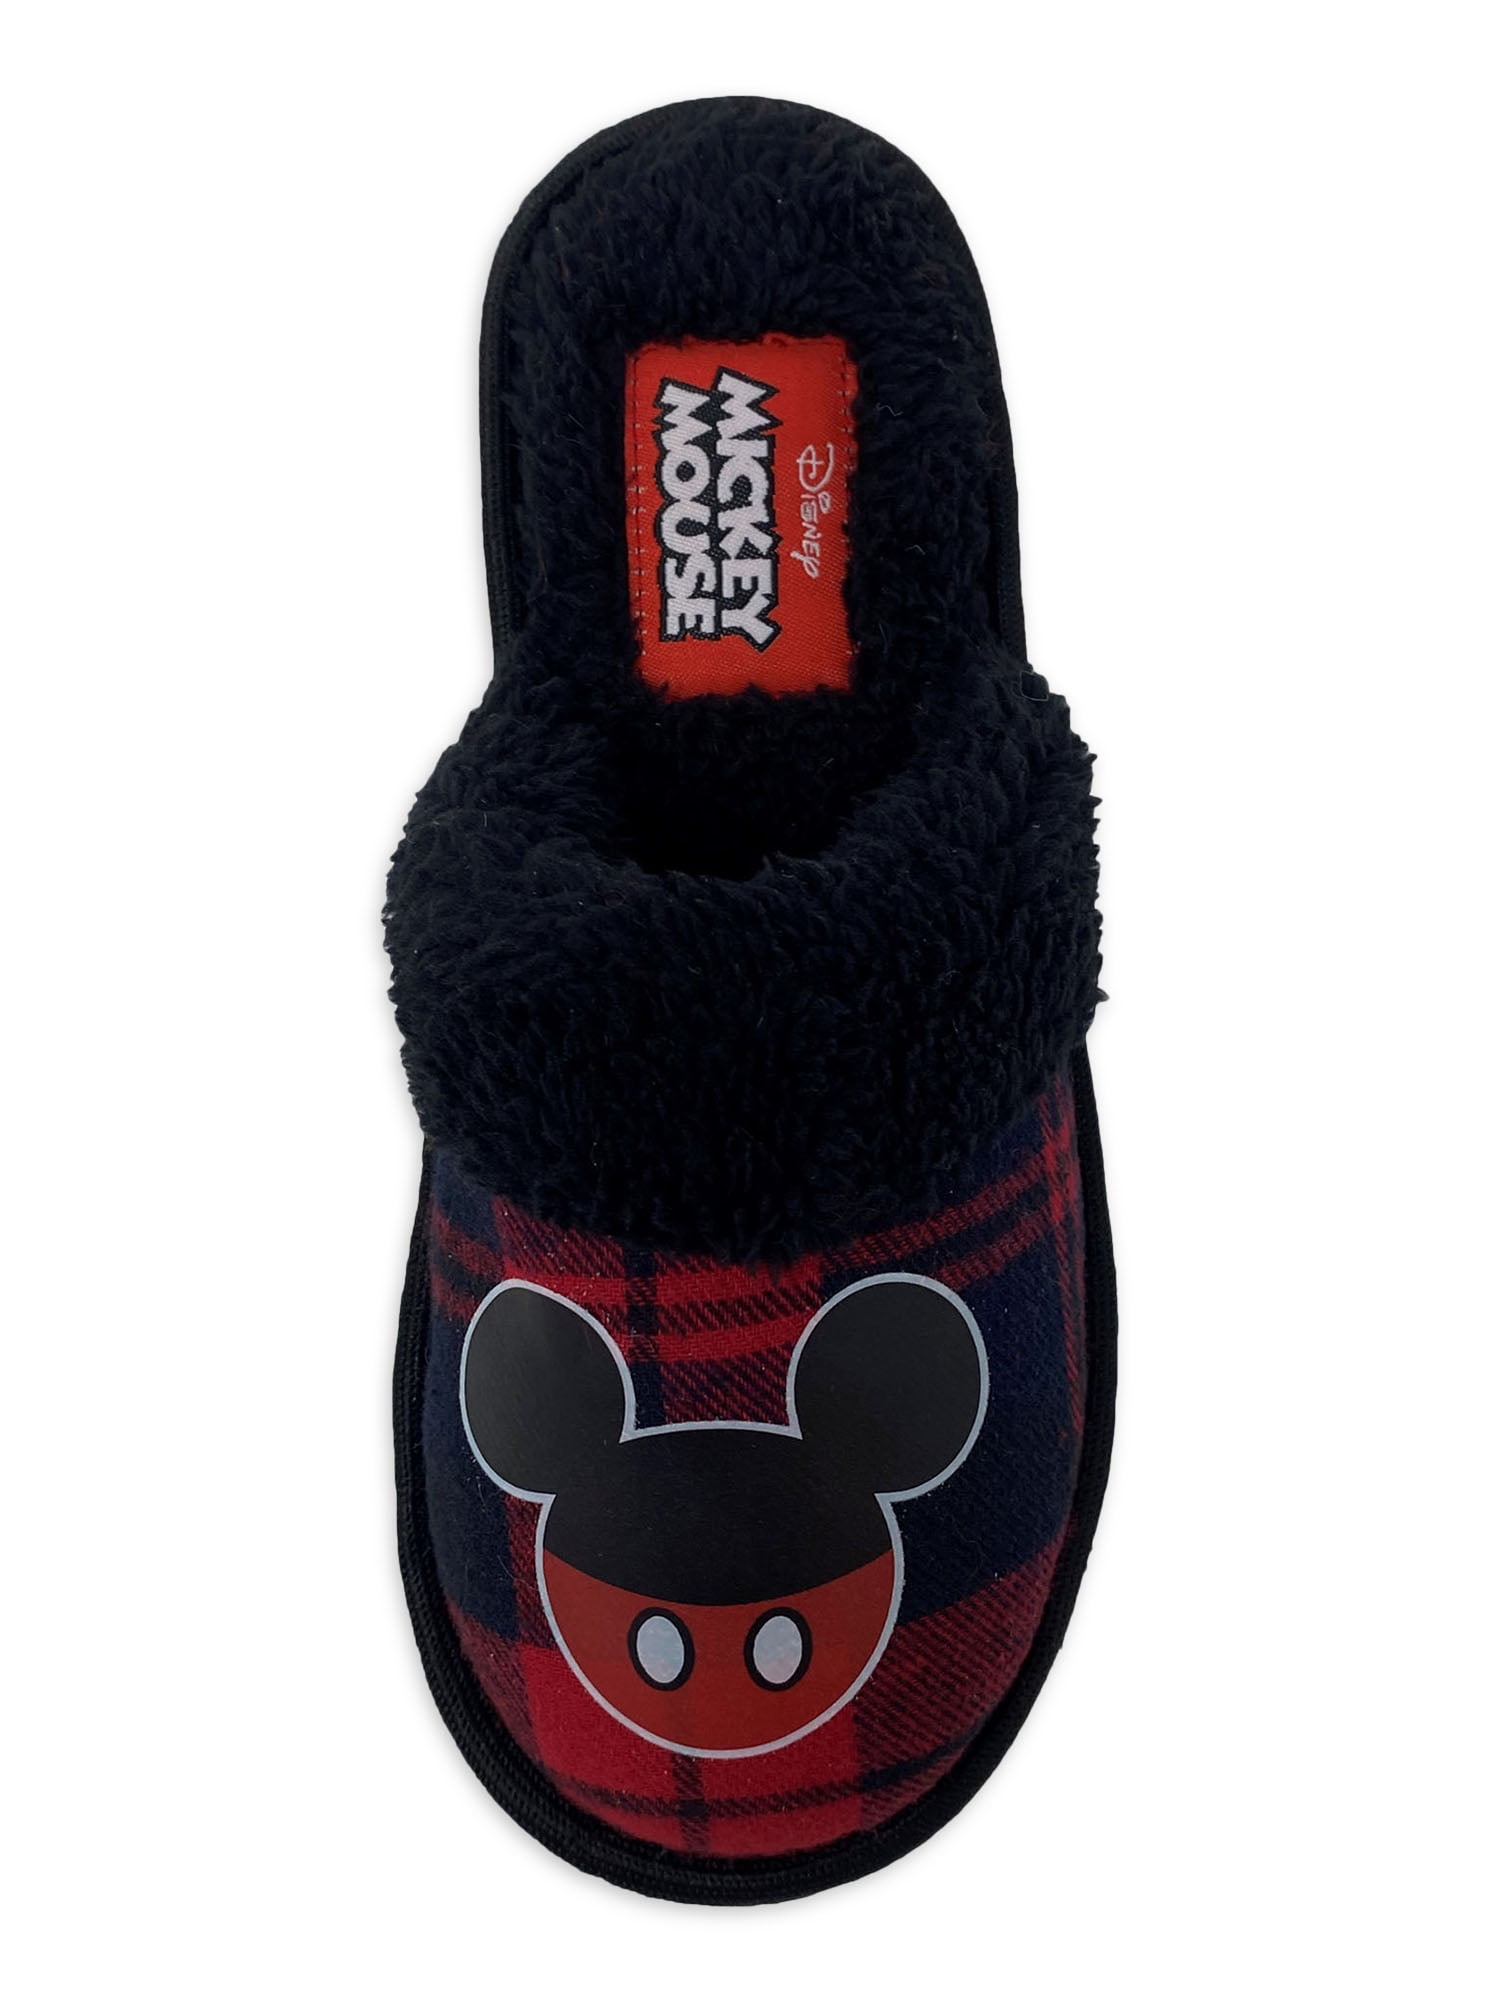 Boys Size 5-6 Disney Mickey Mouse House Shoe Slippers Cute Gift 